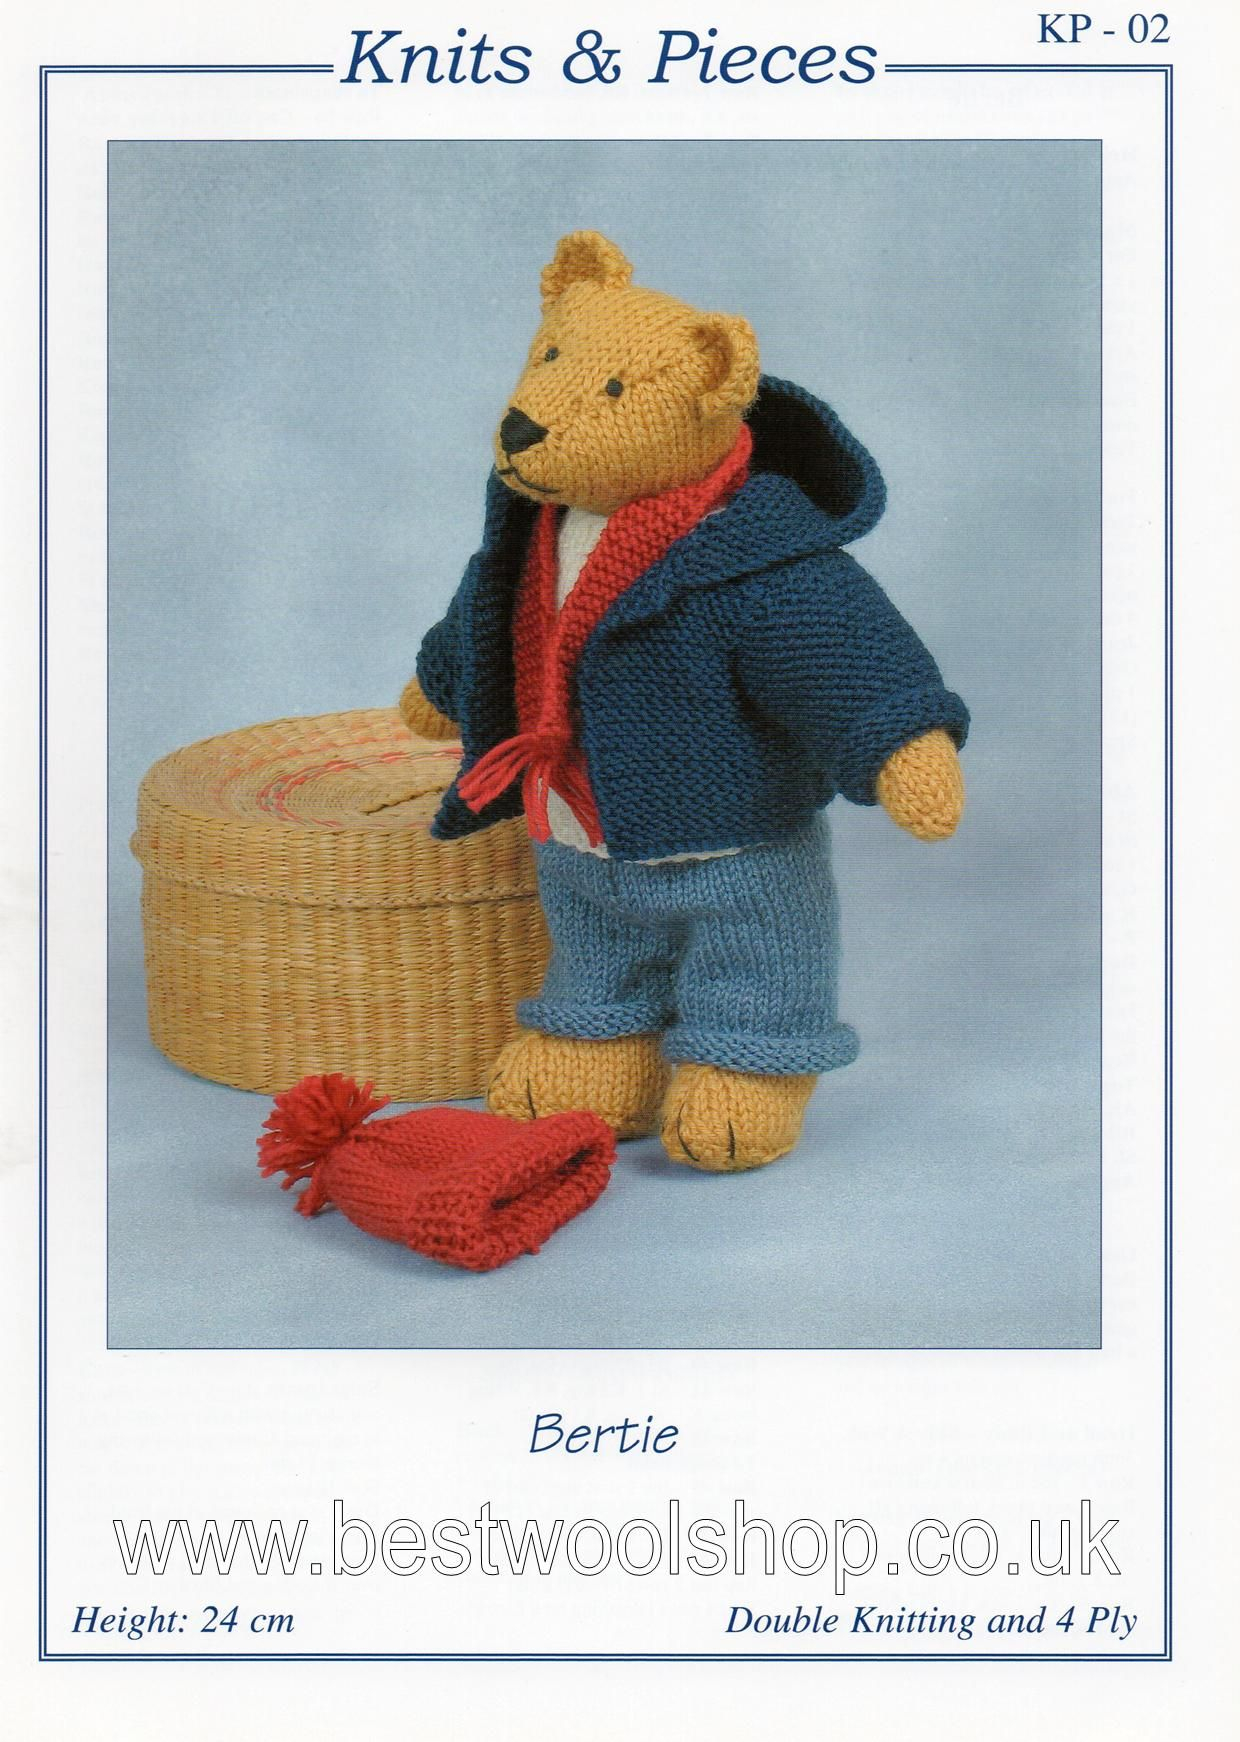 Knitting Patterns For Teddy Bear Clothes Kp 02 Knits Pieces Bertie Teddy Bear Clothes Knitting Pattern Sandra Polley